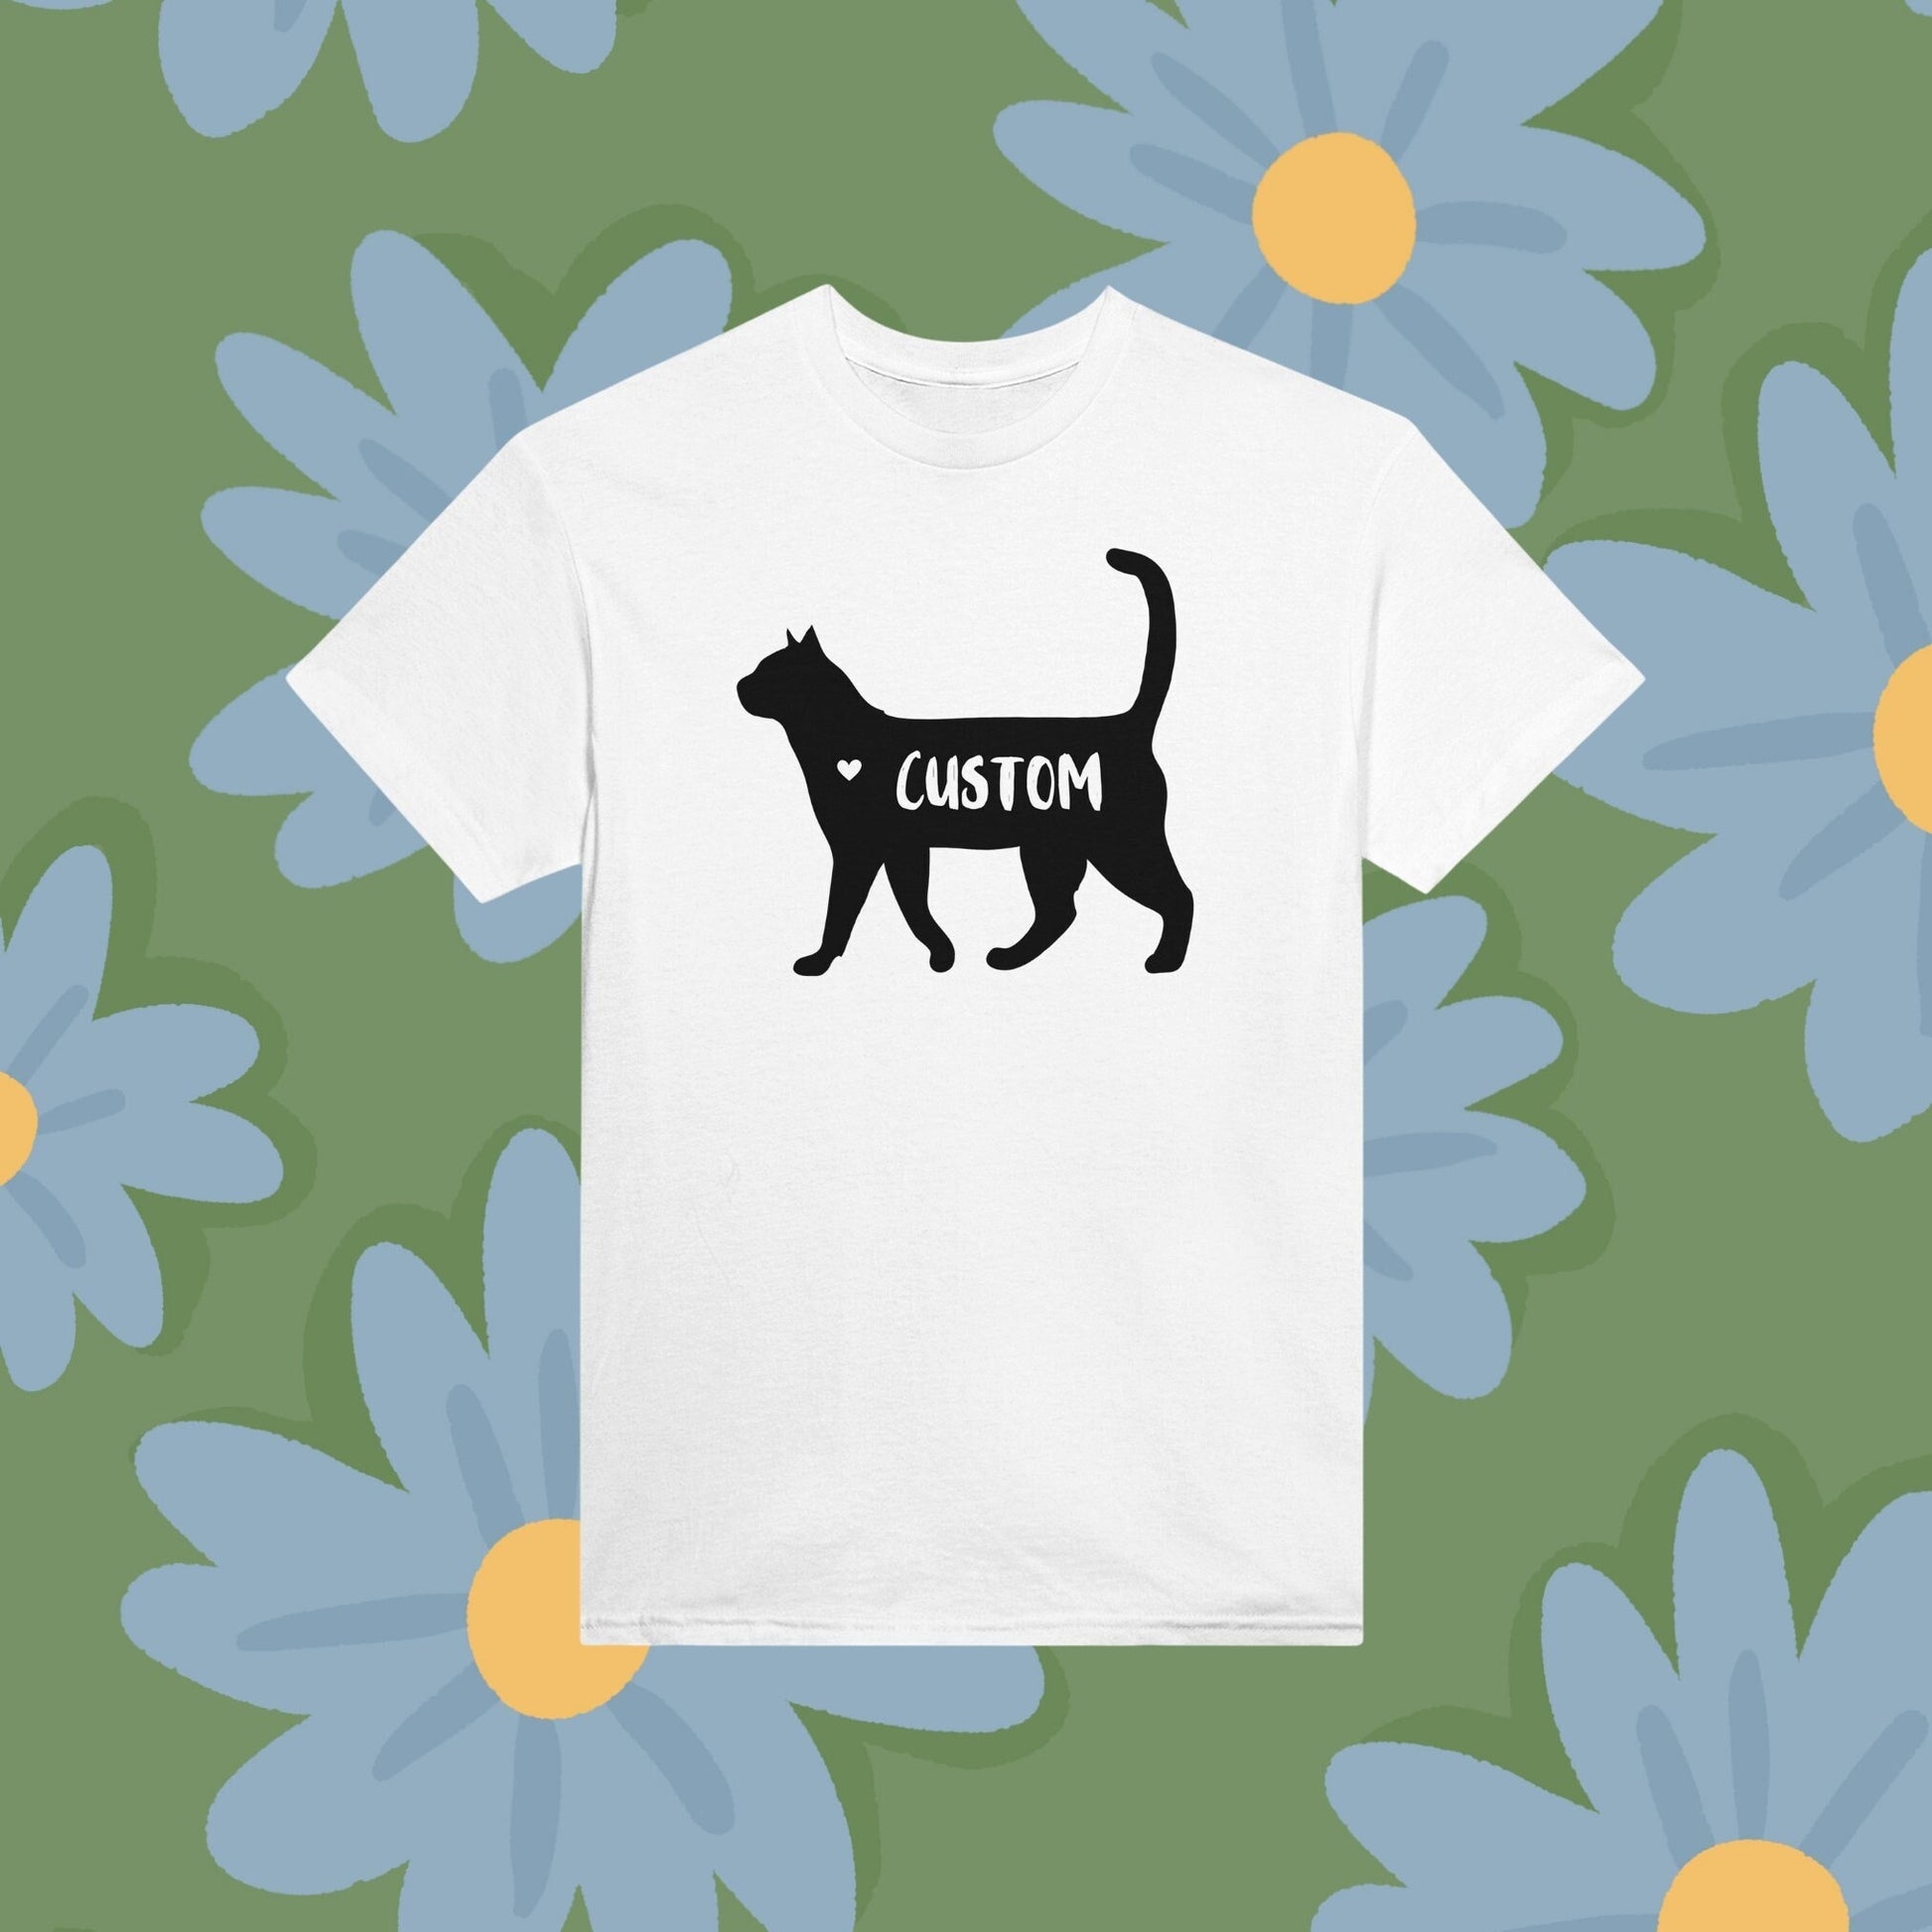 Personalized Cat Silhouette T-Shirt - Customize with Your Cat&#39;s Name! , Cat Silhouette, Cat Obsessed, Crazy Cat Lady